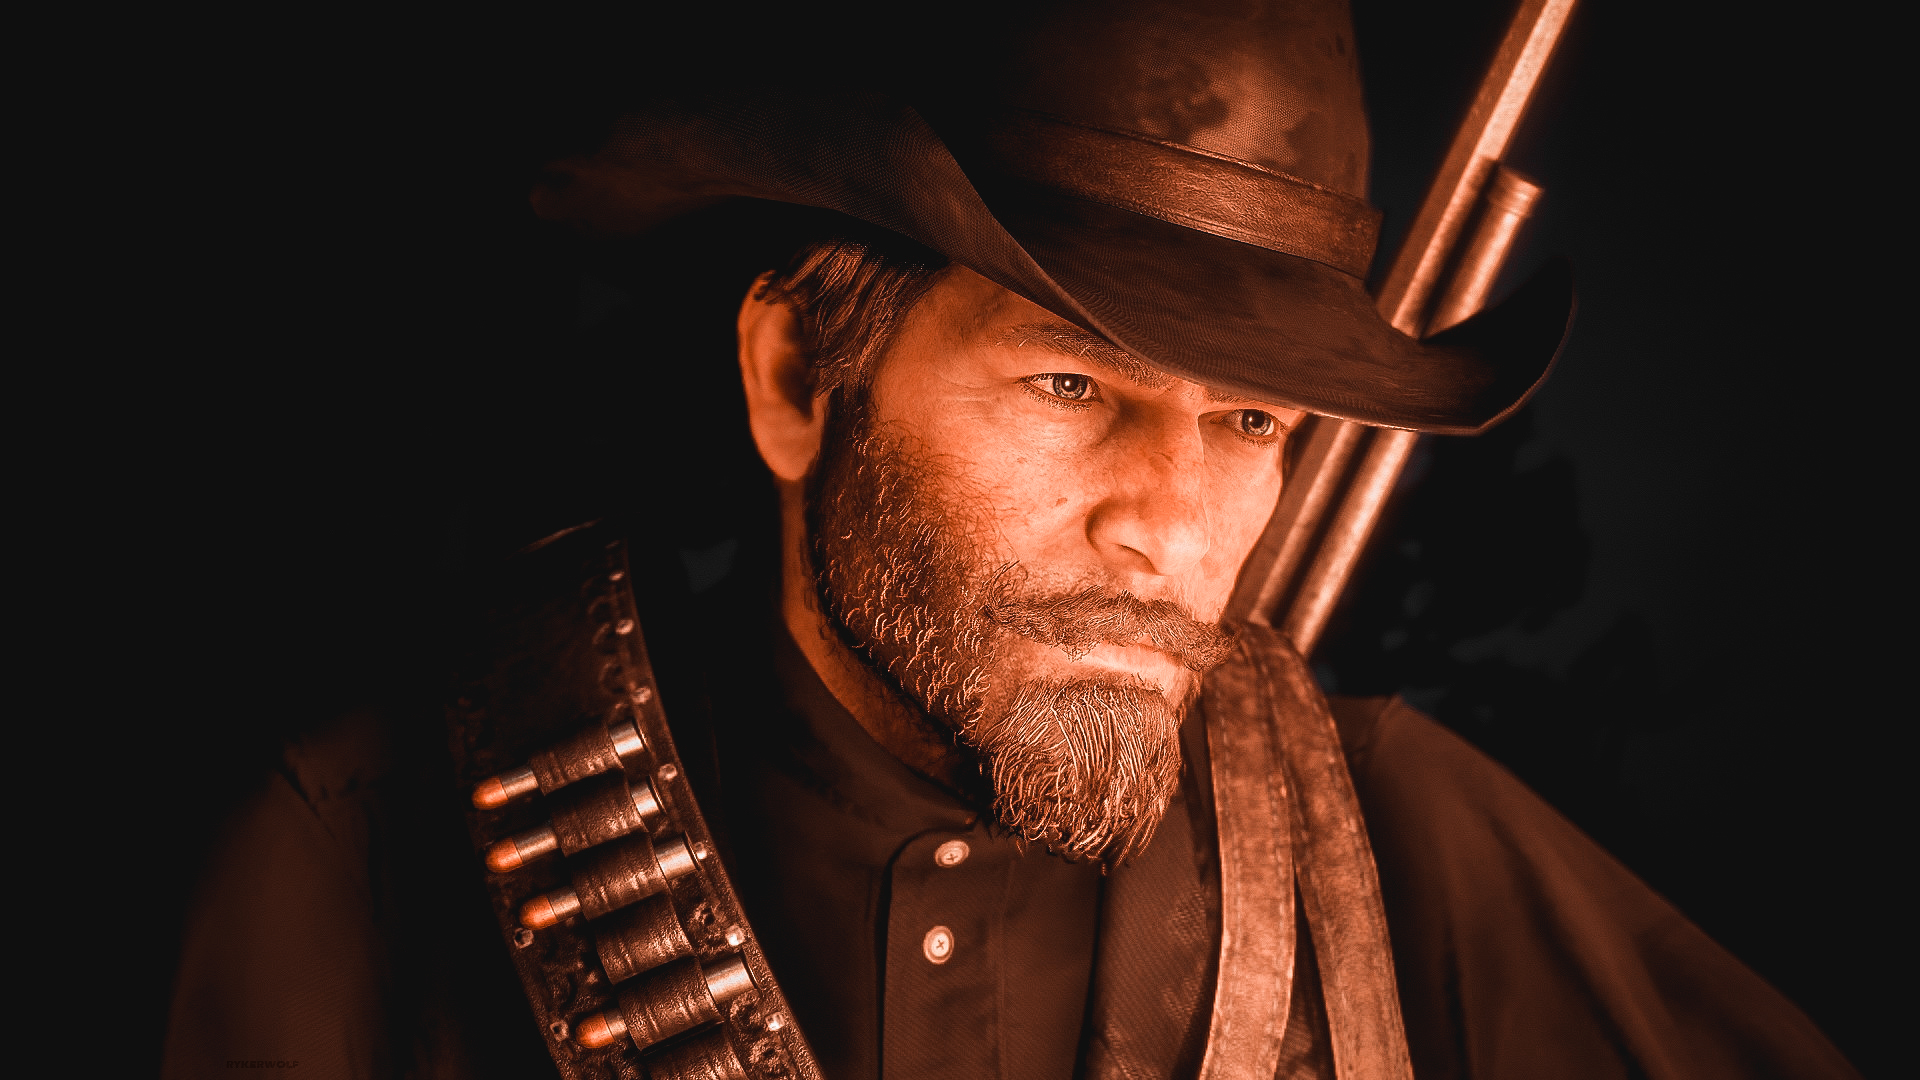 Arthur Morgan, video game characters, beard, Red Dead Redemption 2,  Rockstar Games, video games, Red Dead Redemption, CGI, hat